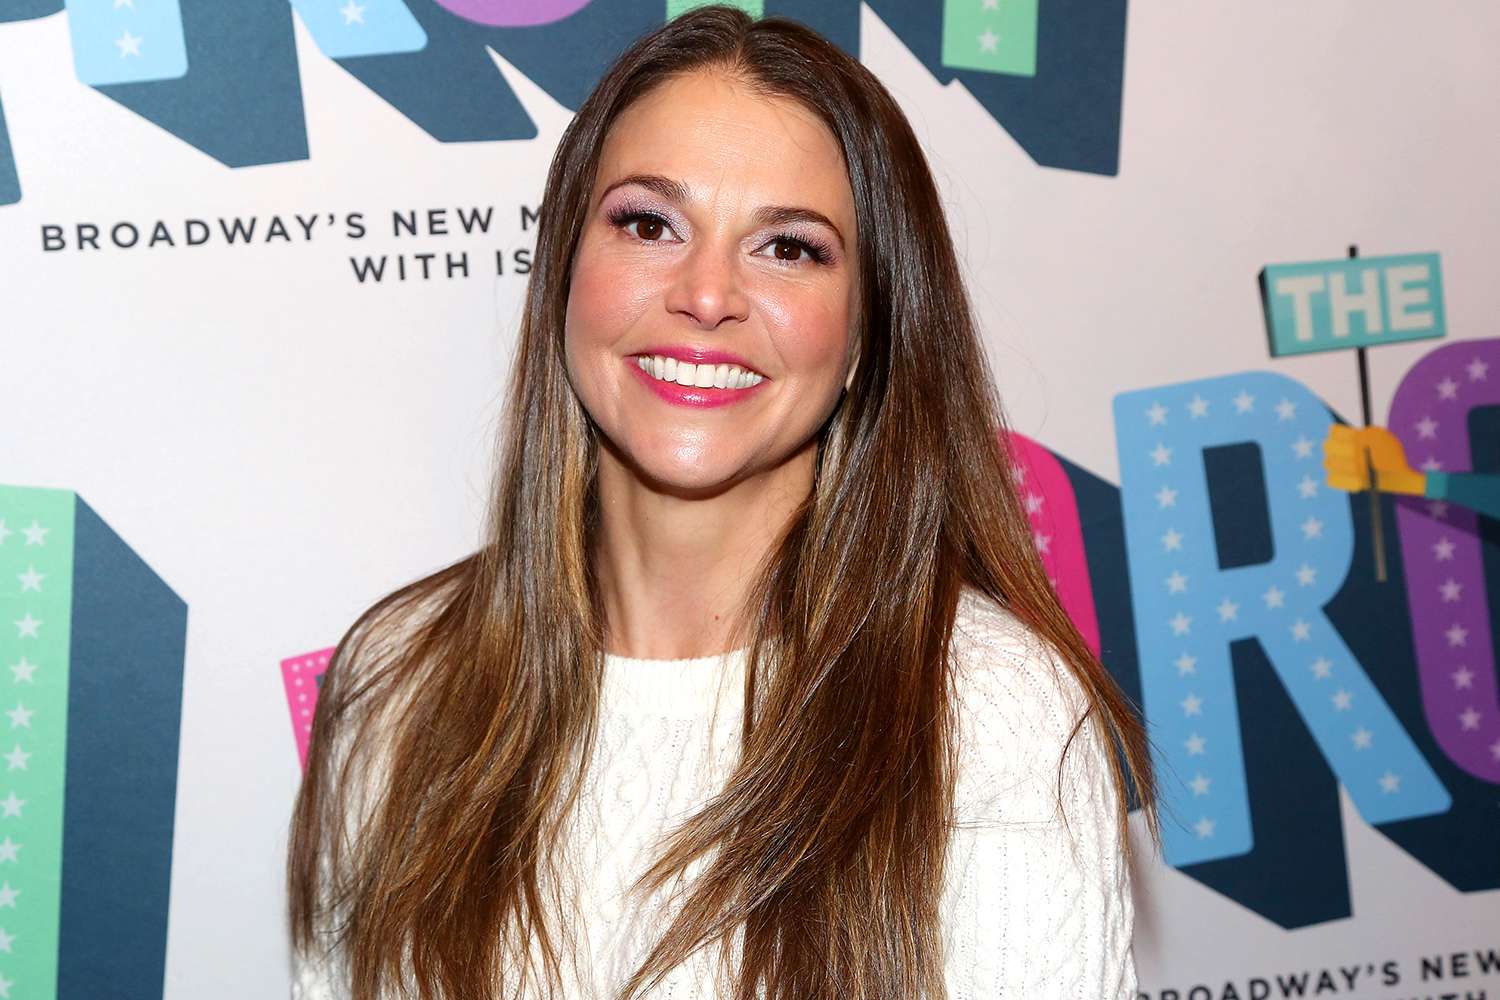 Sutton Foster Returning to Broadway in 'Once Upon a Mattress' Revival